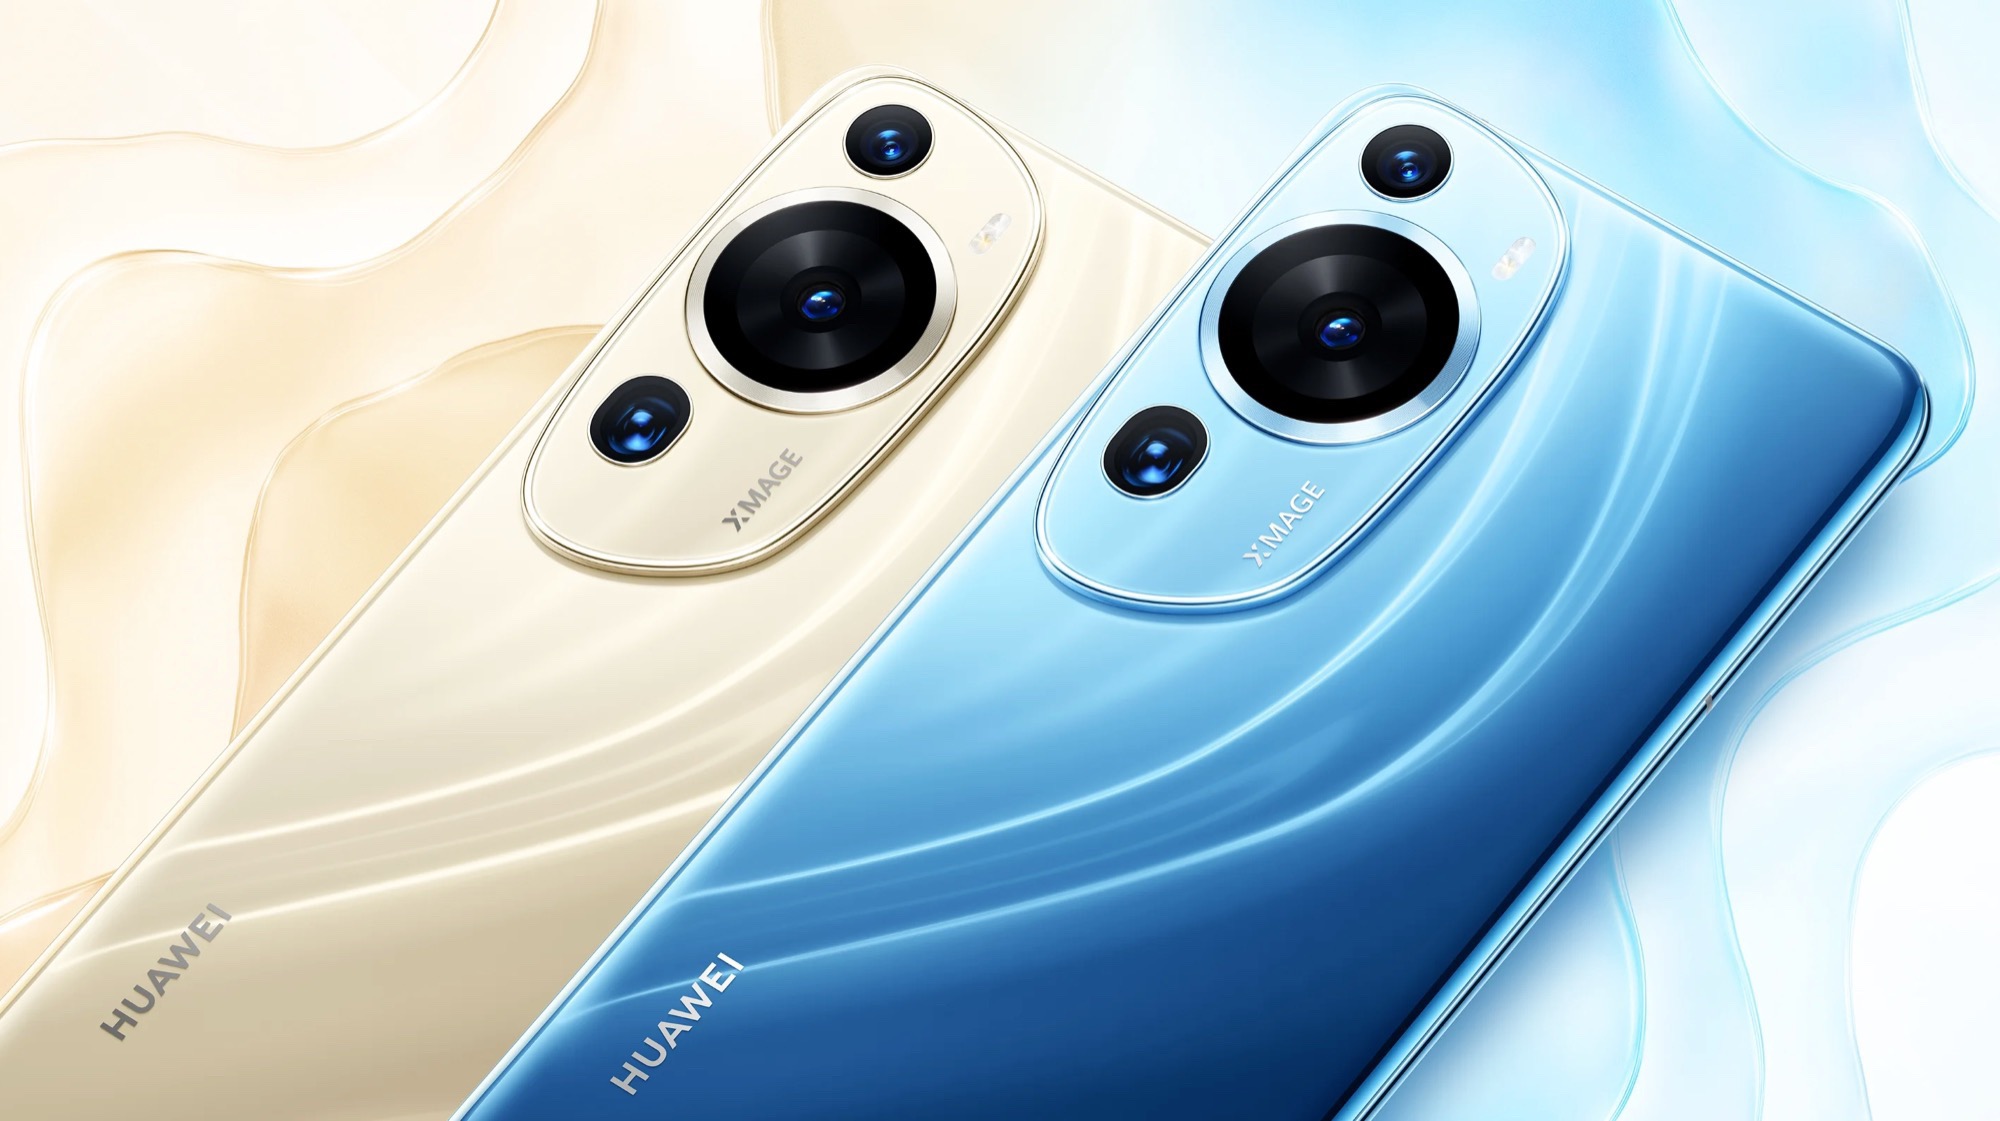 Moreel nadering Krachtcel Huawei P60, P60 Pro and P60 Art announced with new flagship features -  NotebookCheck.net News